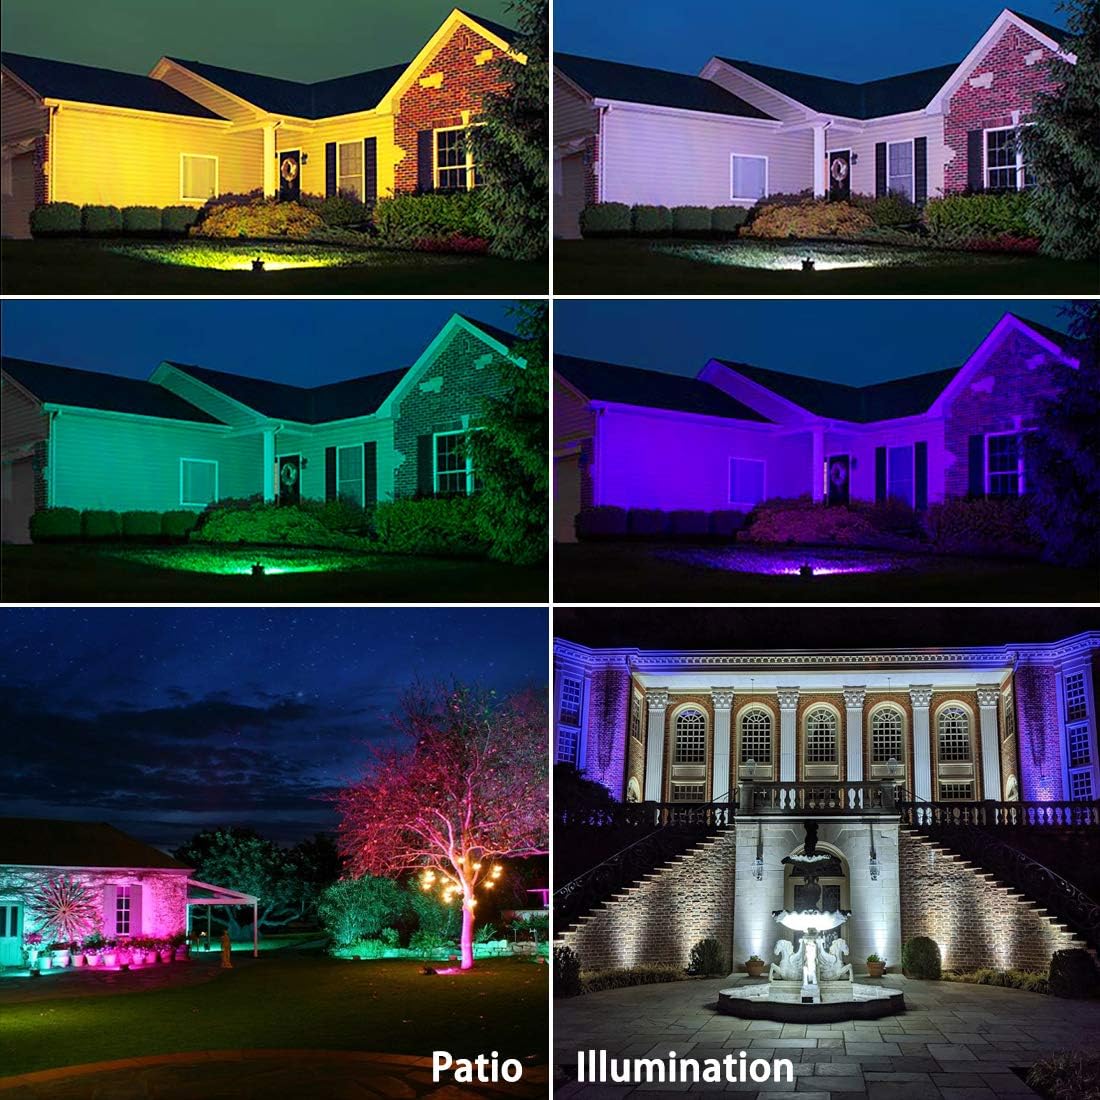 MELPO 30W Led Flood Light Outdoor 300W Equivalent, Color Changing RGB Lights with Remote, 120 RGB Colors, Warm White 2700K, Timing, C